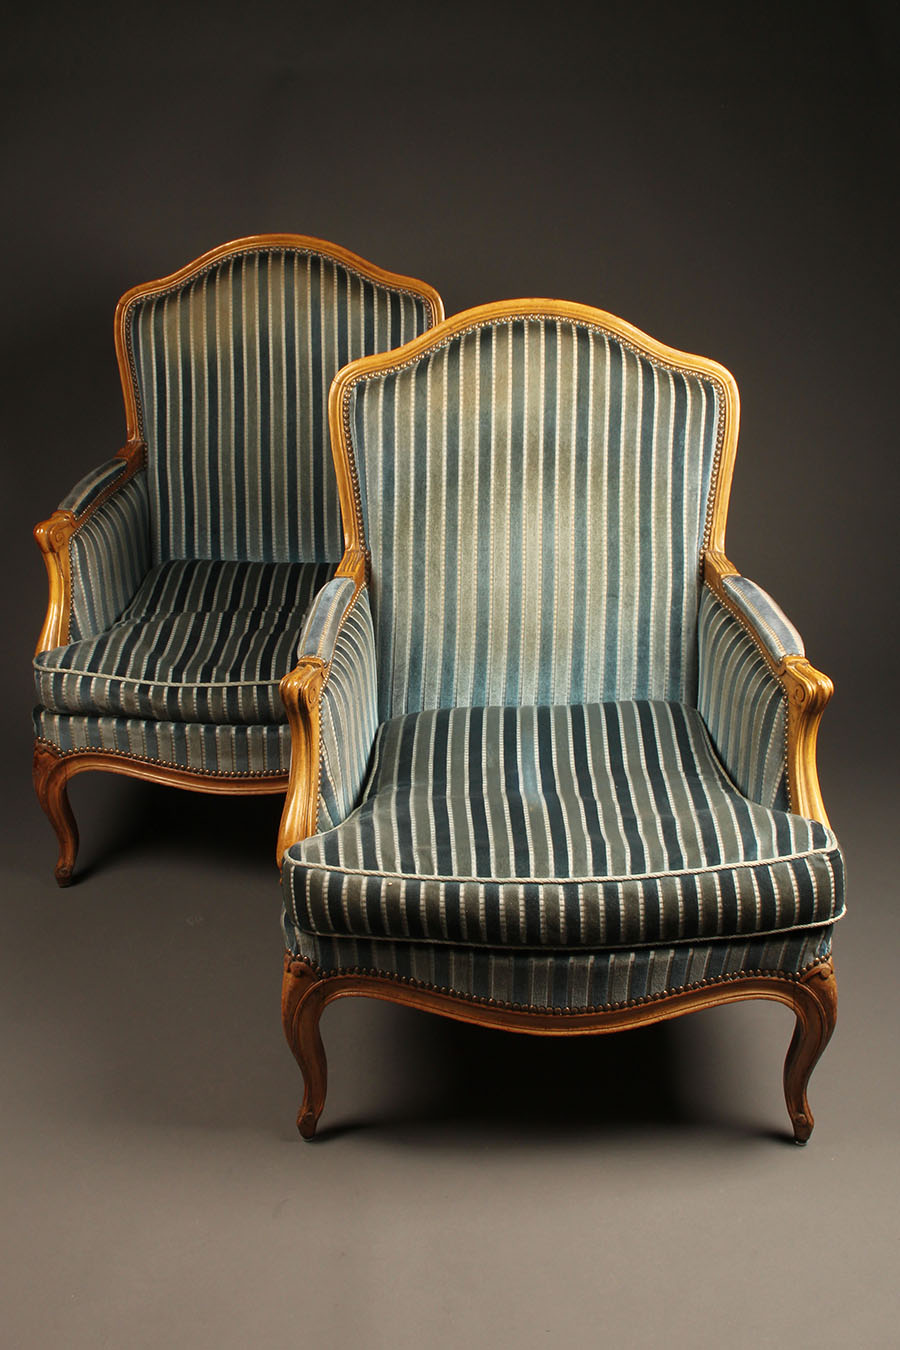 Pair of French Louis XV style bergére chairs with hand carved